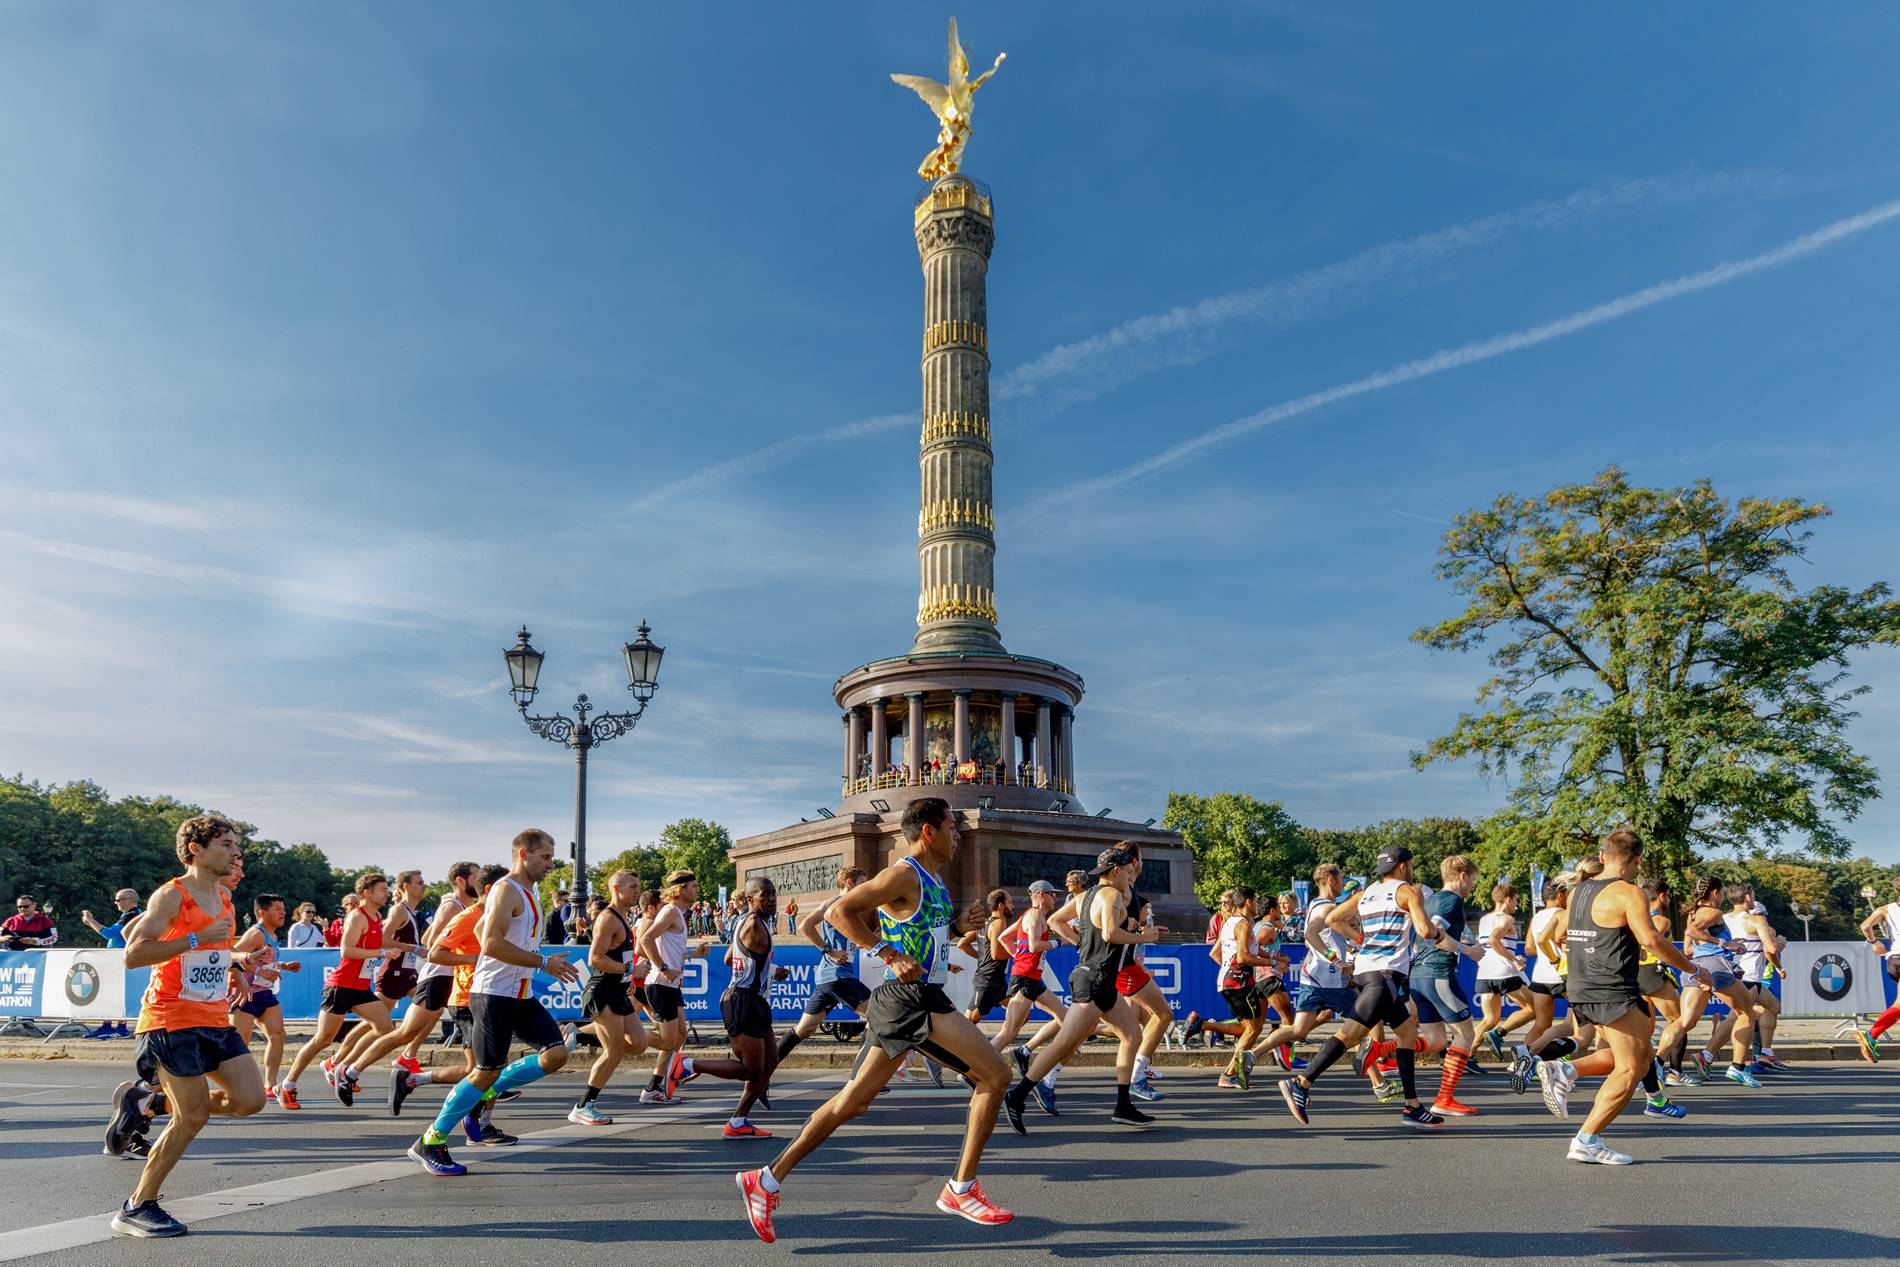 How To Get Into The Berlin Marathon